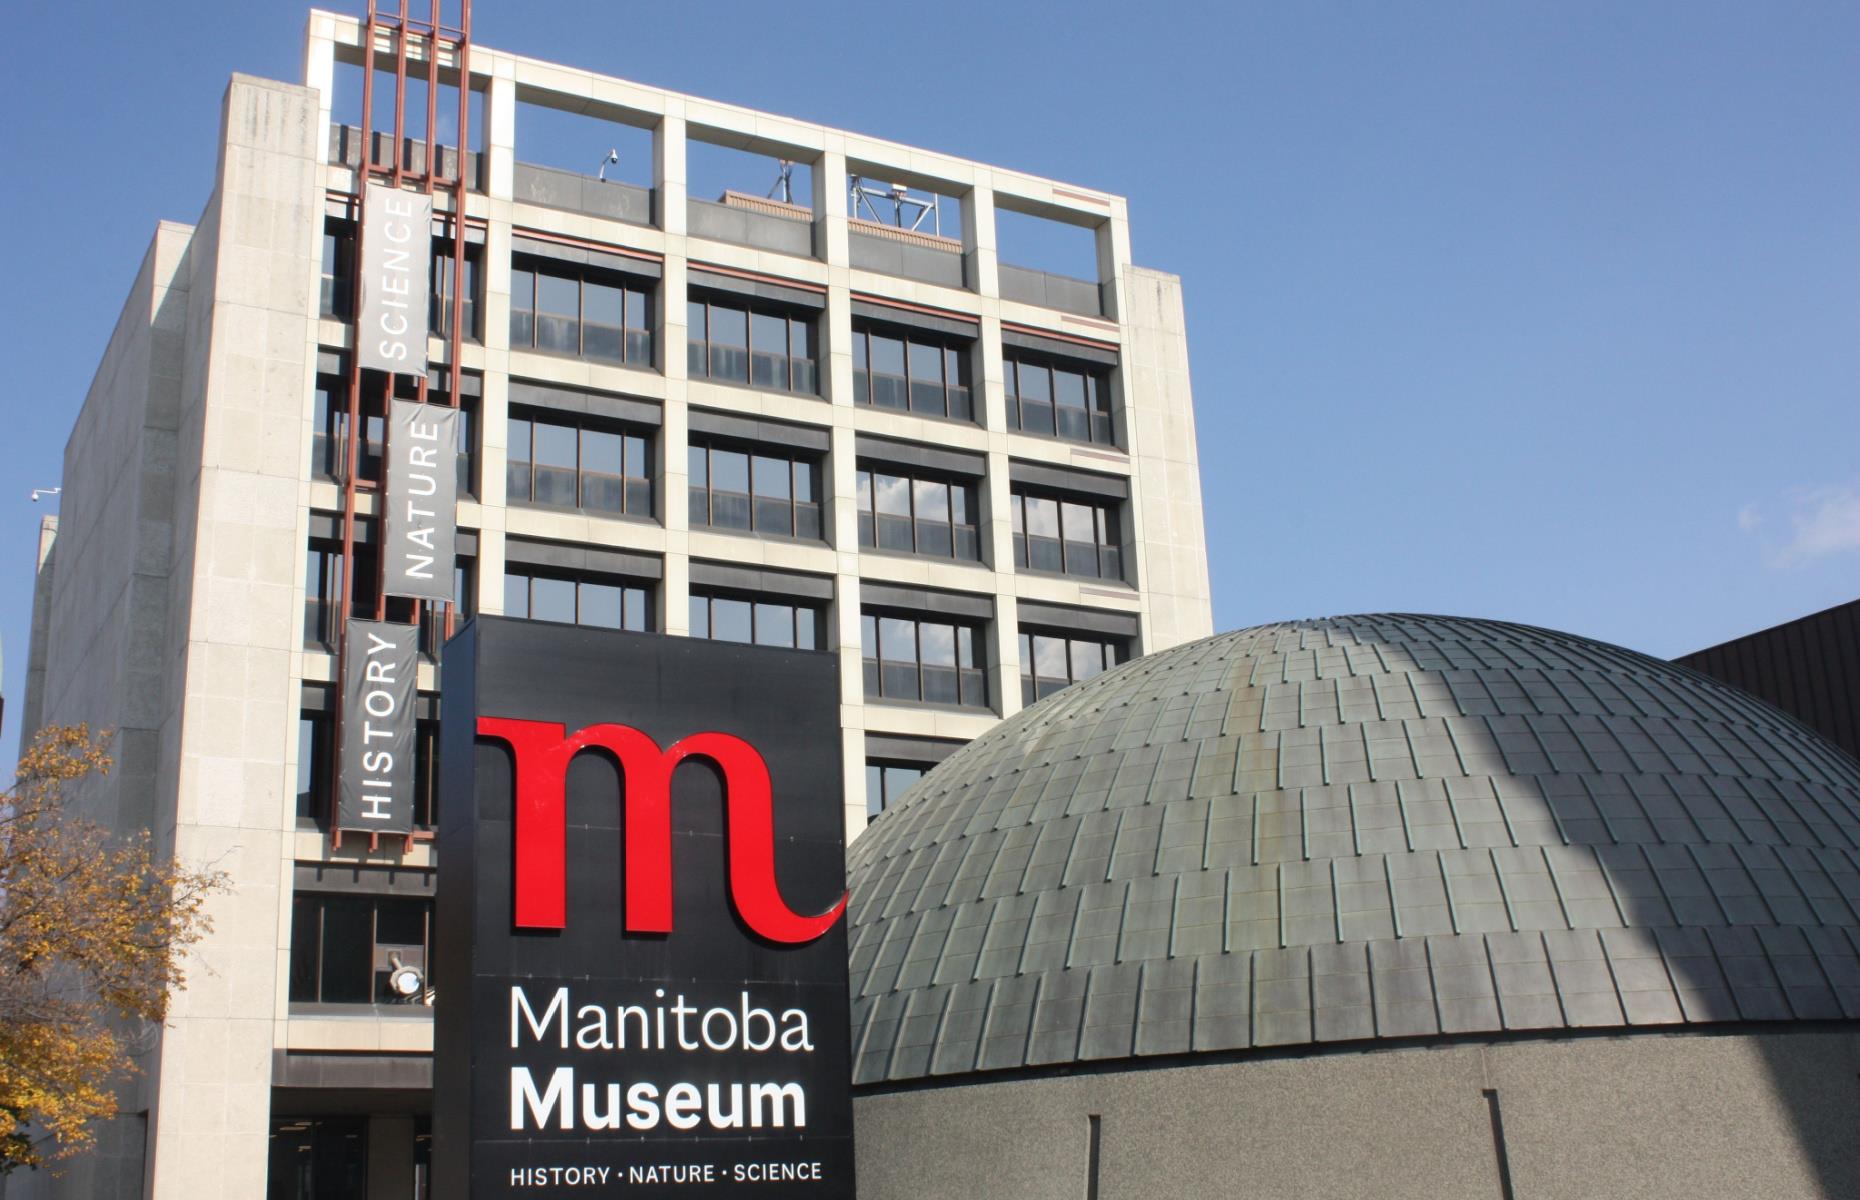 <p>Since the city of Winnipeg has the distinction of hosting the much-visited Canadian Museum For Human Rights, the other museums in the city tend to be overshadowed, including this award-winning <a href="http://manitobamuseum.ca">center for heritage and science learning</a>. A series of unique three-dimensional walk-through galleries tell the history of Manitoba (dating back millions of years), detailing the complexity of the land and its people. There’s also a planetarium on site.</p>